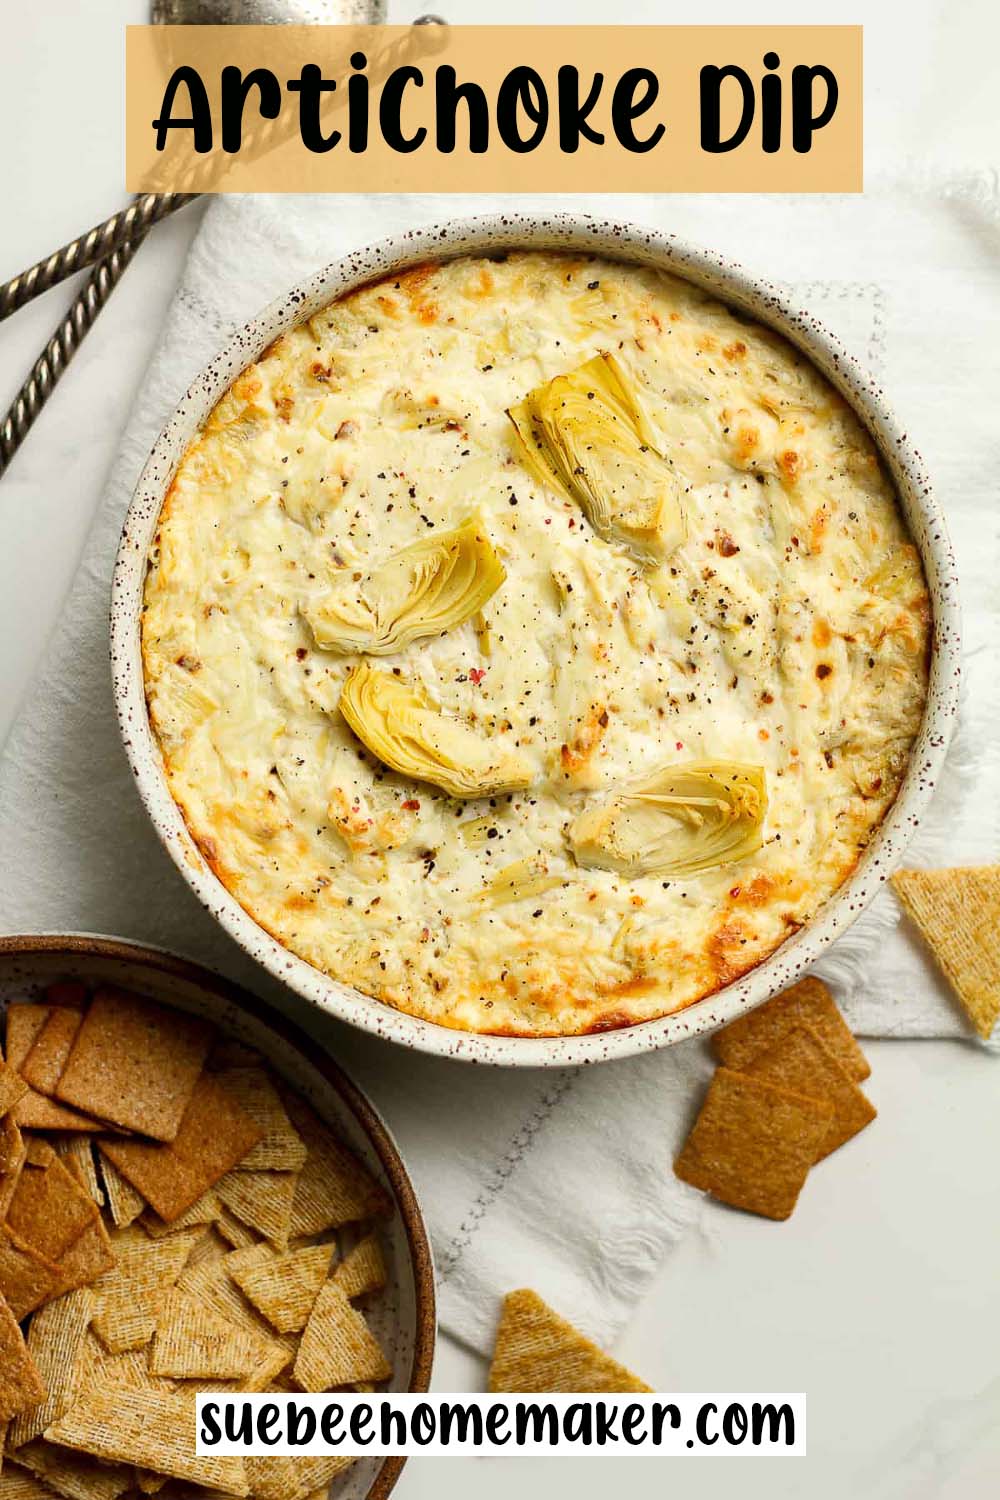 A bowl of artichoke dip with a bowl of crackers.